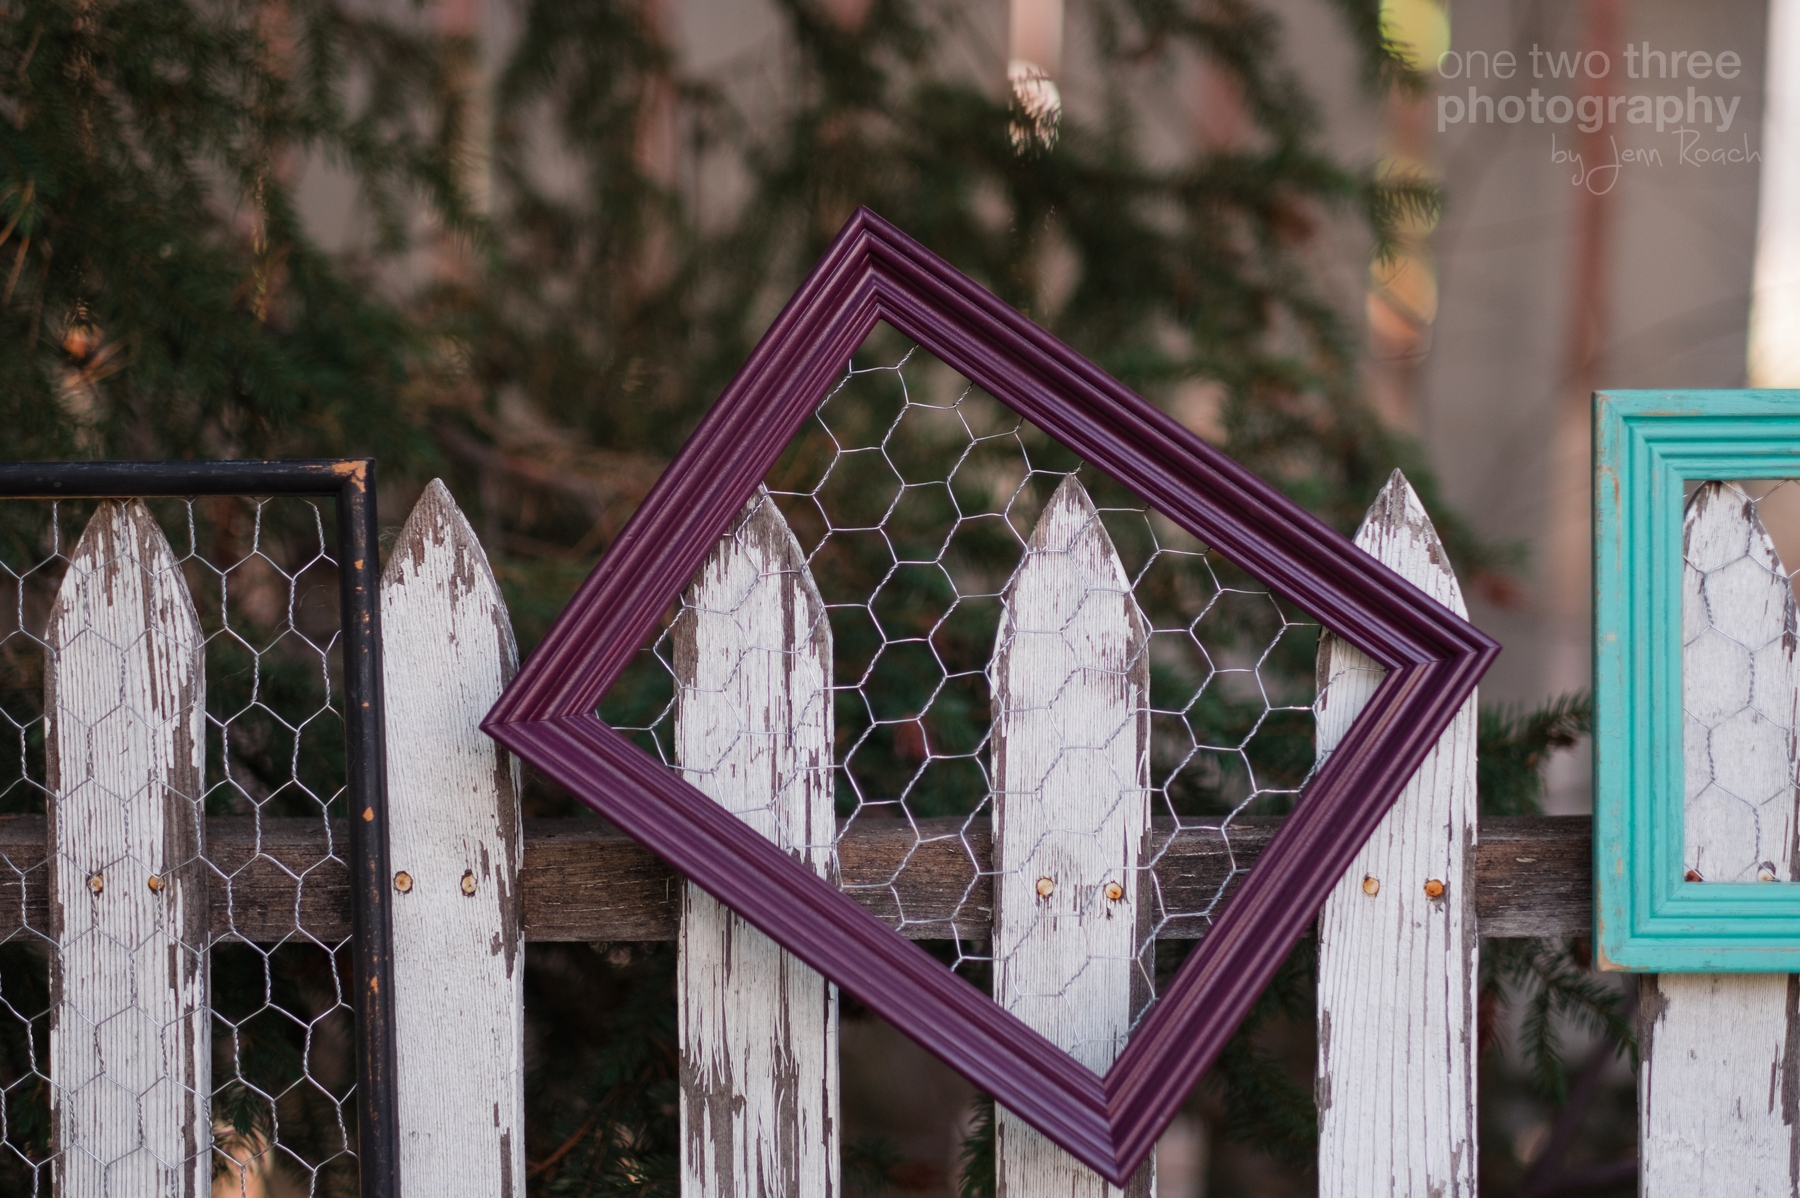 More details of frames with wire used for hanging photos or recipes